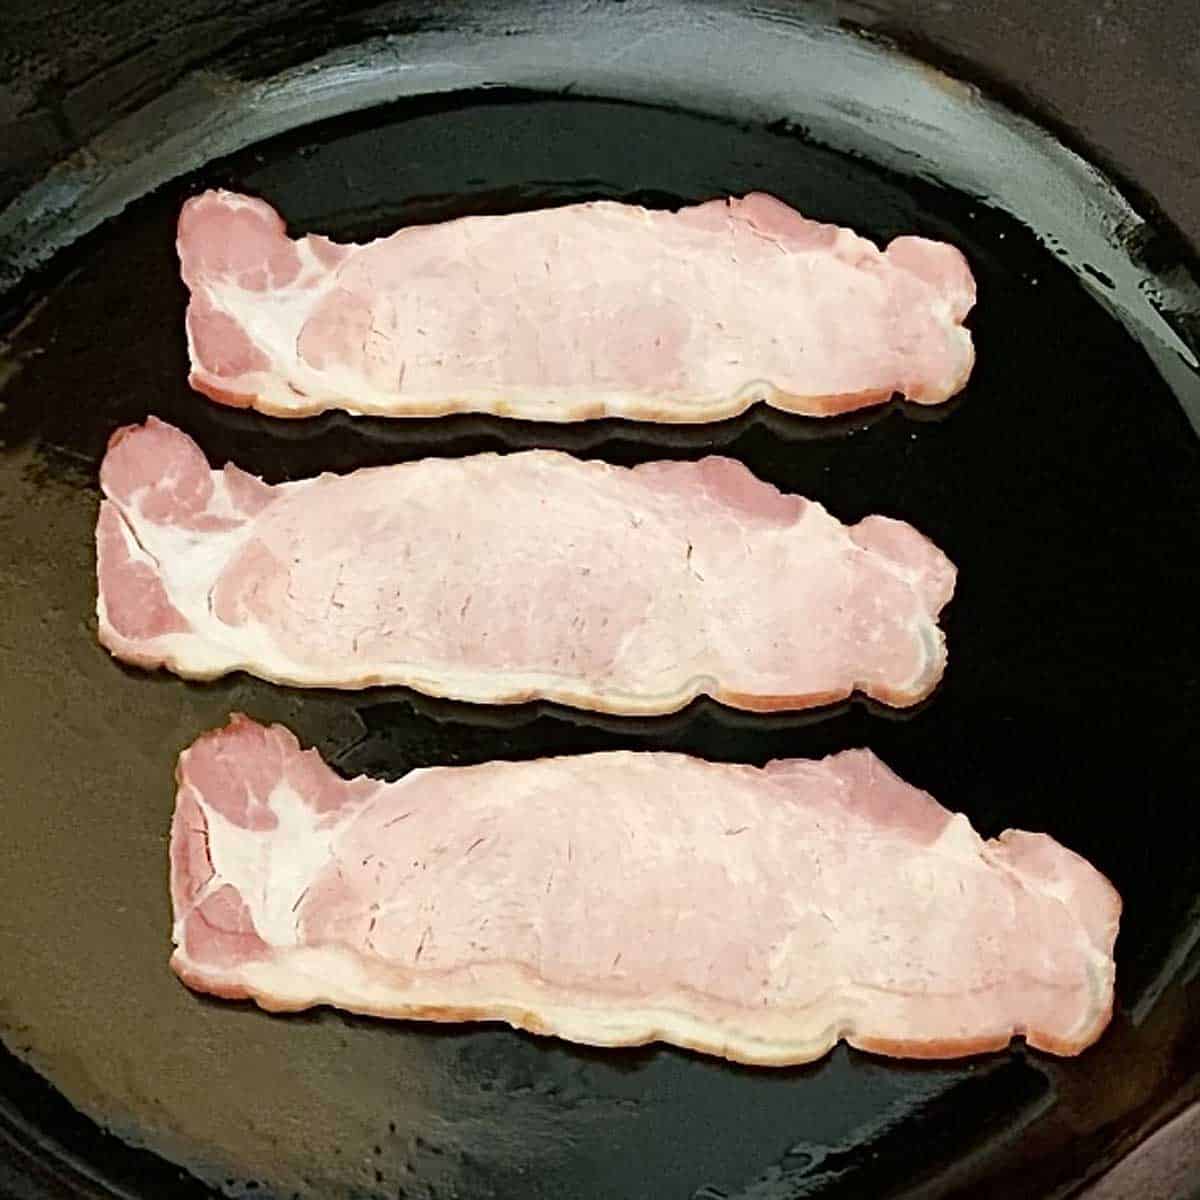 Three strips of back bacon in a black cast iron skillet.